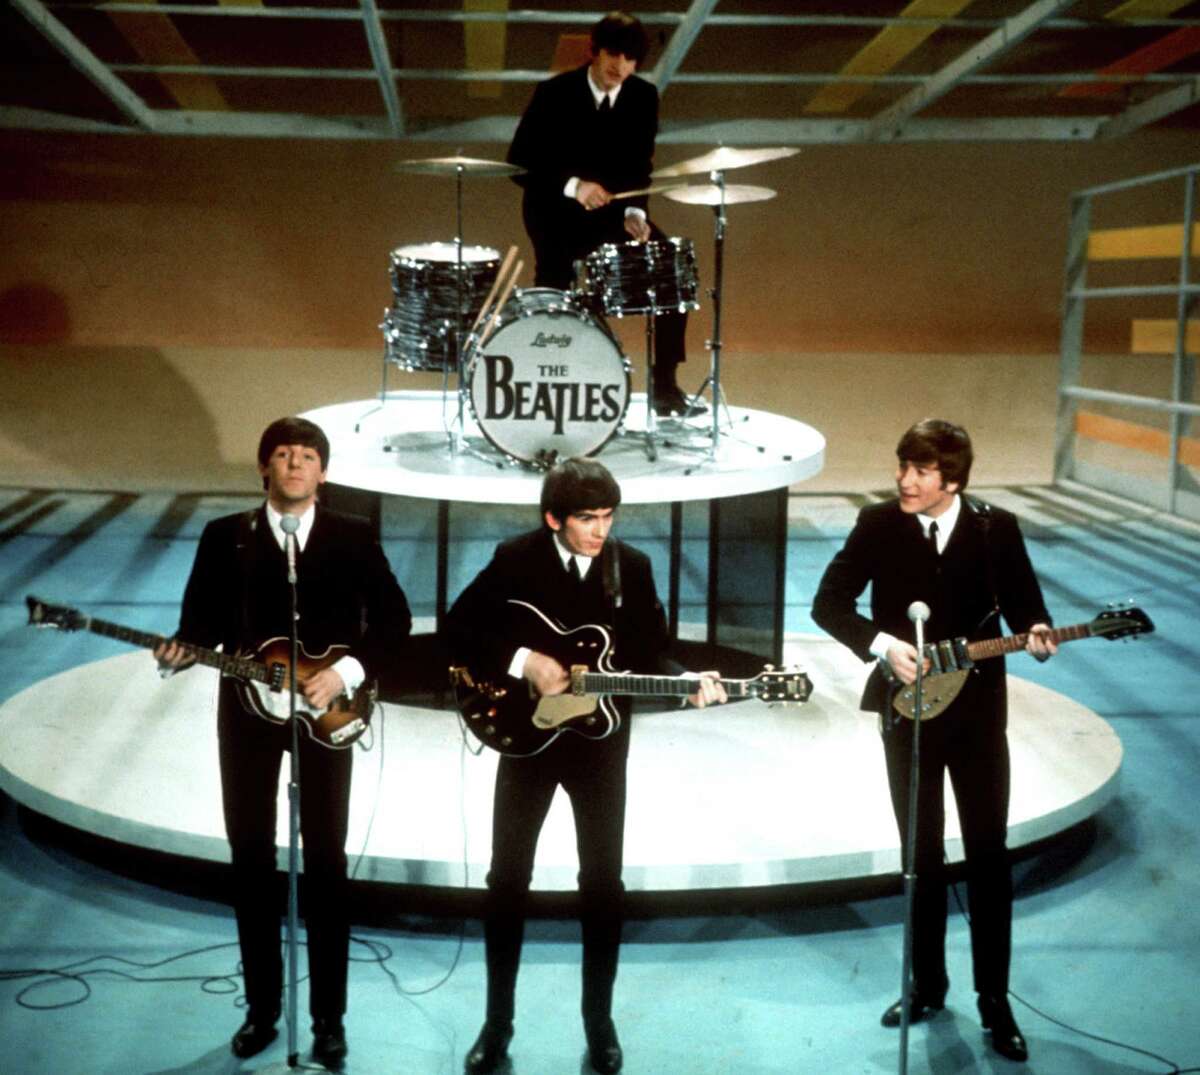 ﻿Bruno MacDonald imagines what bands such as the Beatles, ﻿﻿pictured from the band's first appearance on "The Ed Sullivan Show" ﻿in 1964, may have sounded like in "the Greatest Albums You'll Never Hear," an alternate history of music.﻿﻿